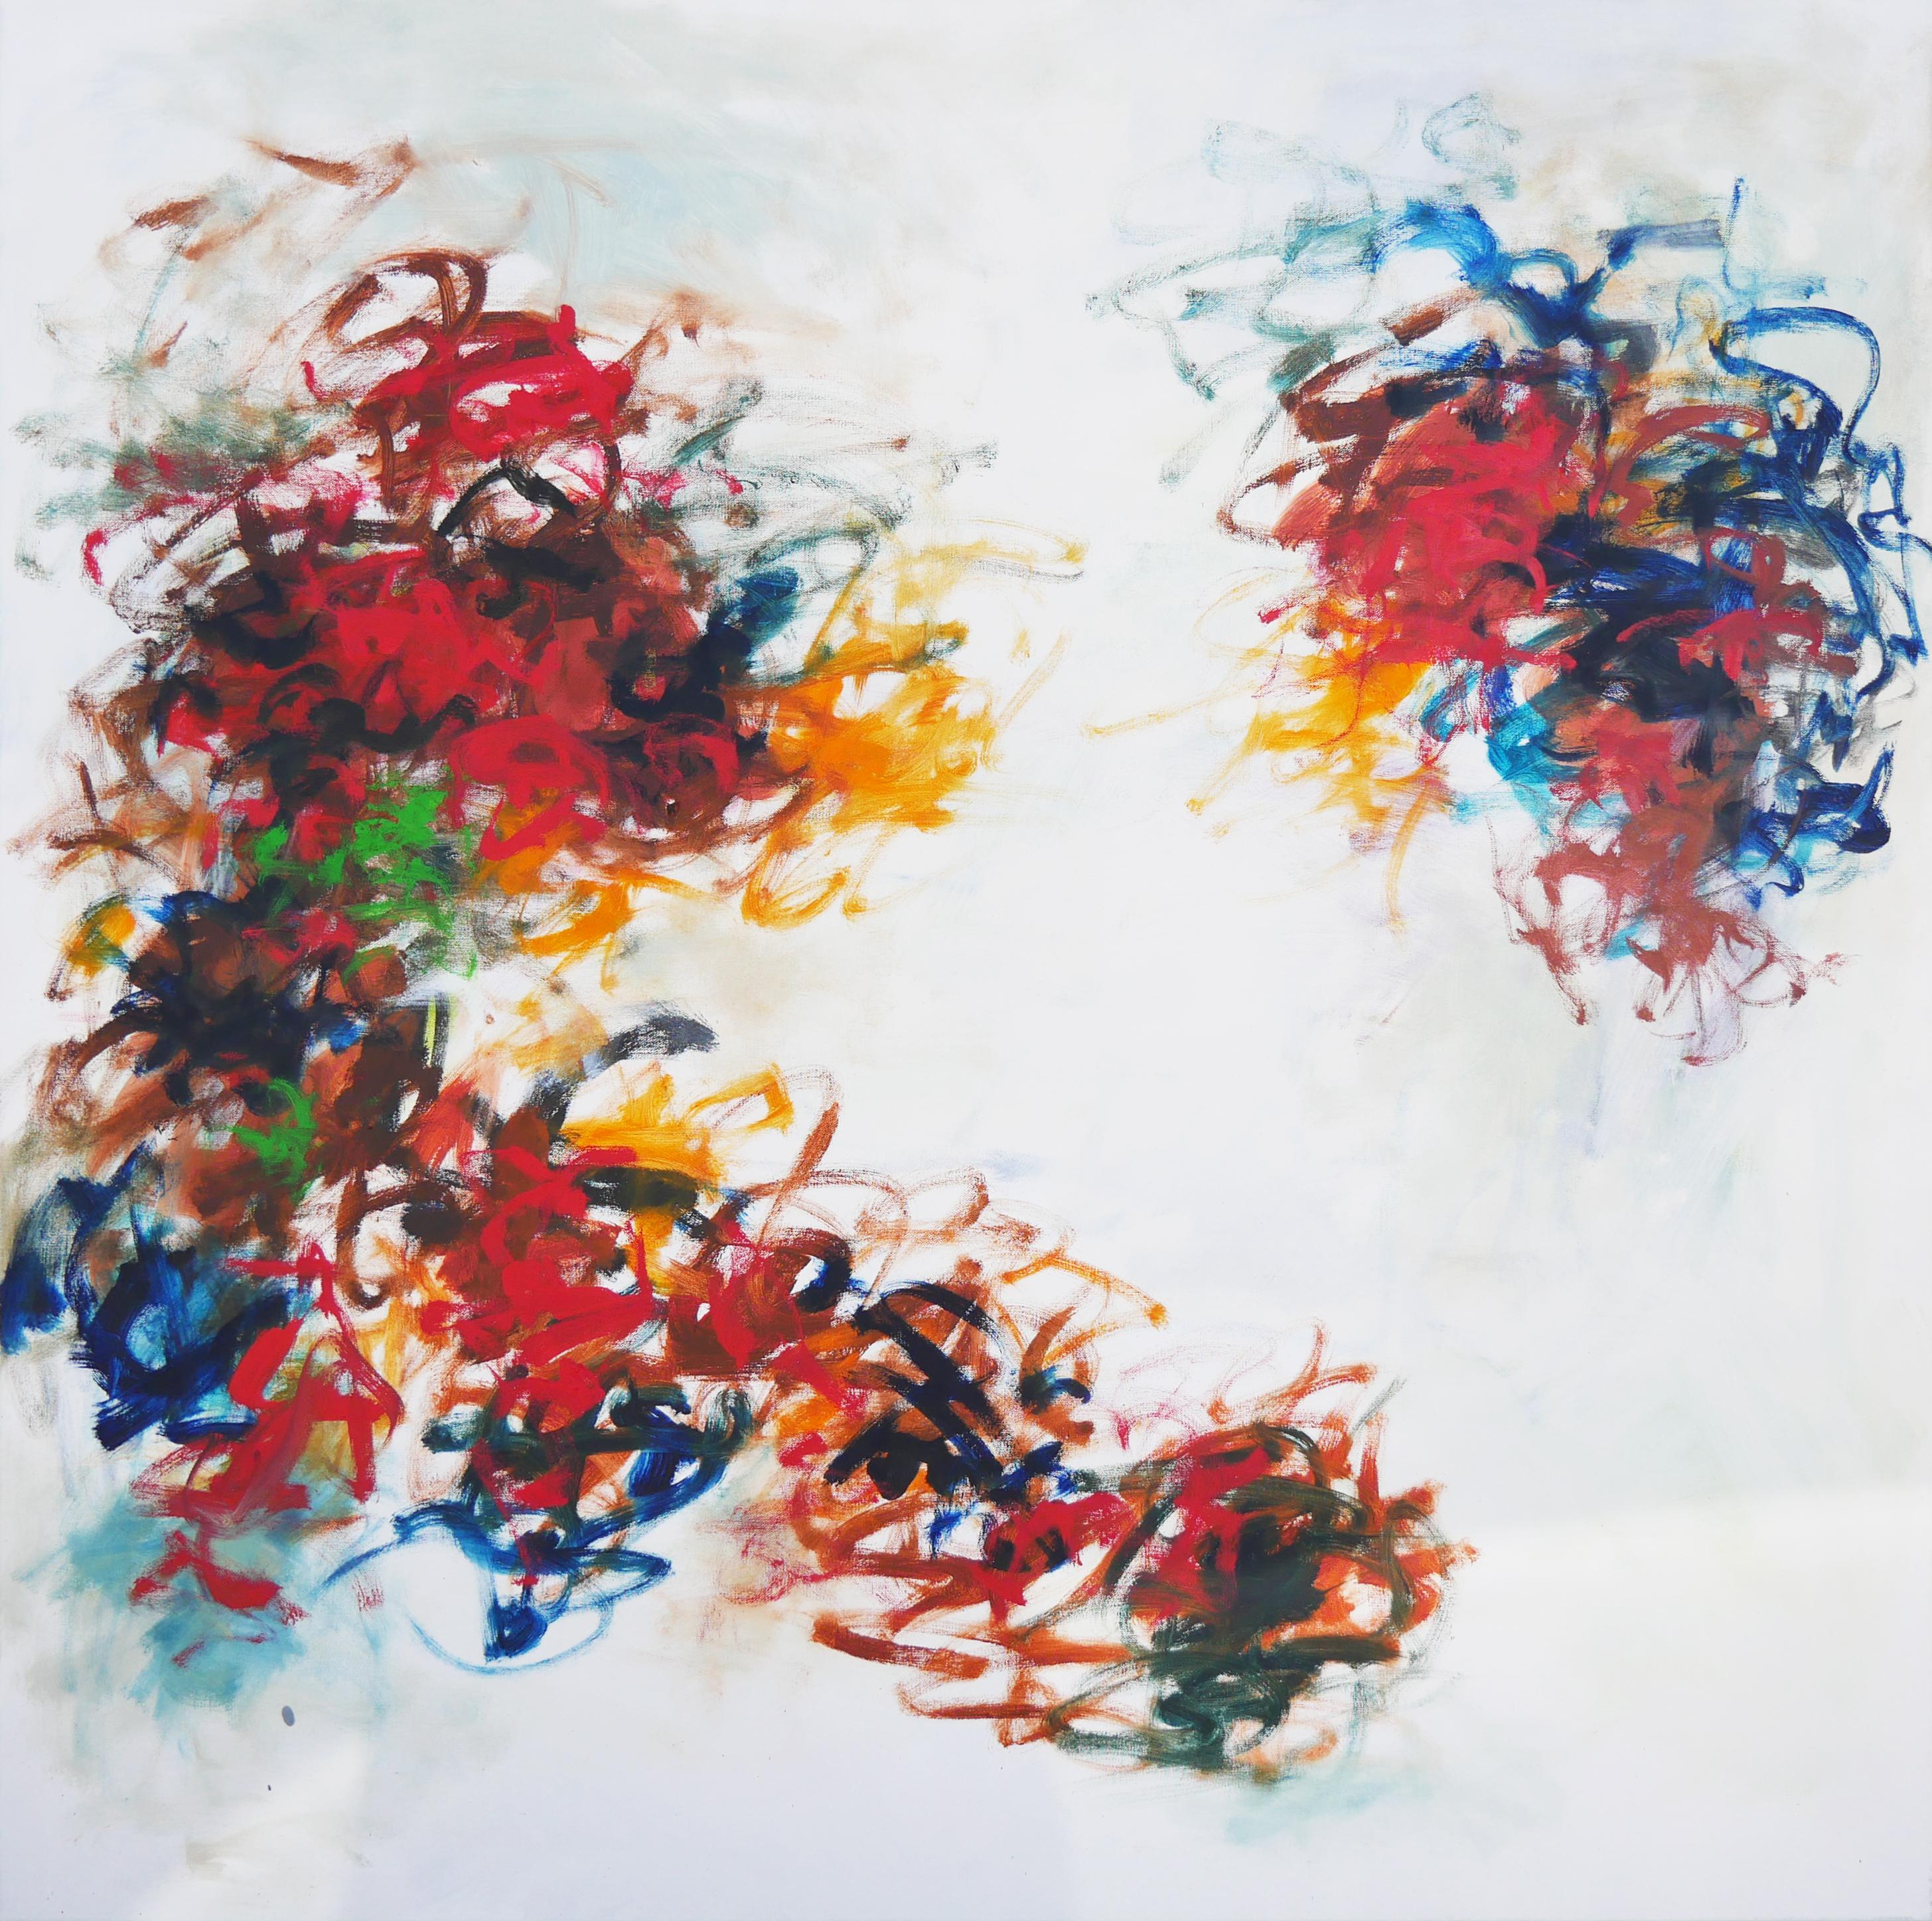 Gerald Syler Abstract Painting - "Untitled 50" Large Red, Yellow, Blue, and Green Abstract Expressionist Painting